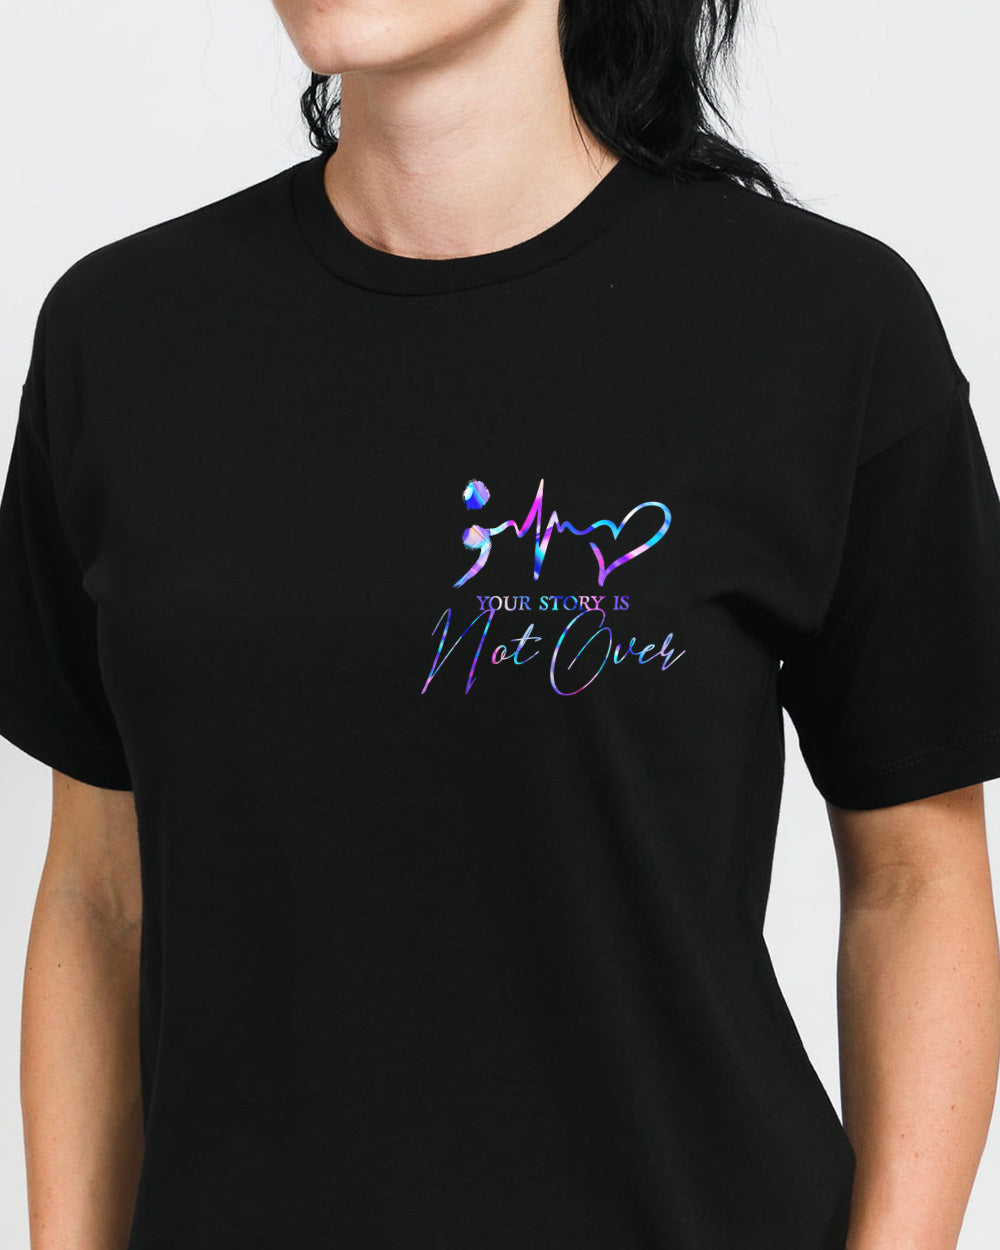 Stay Flag Women's Suicide Prevention Awareness Tshirt